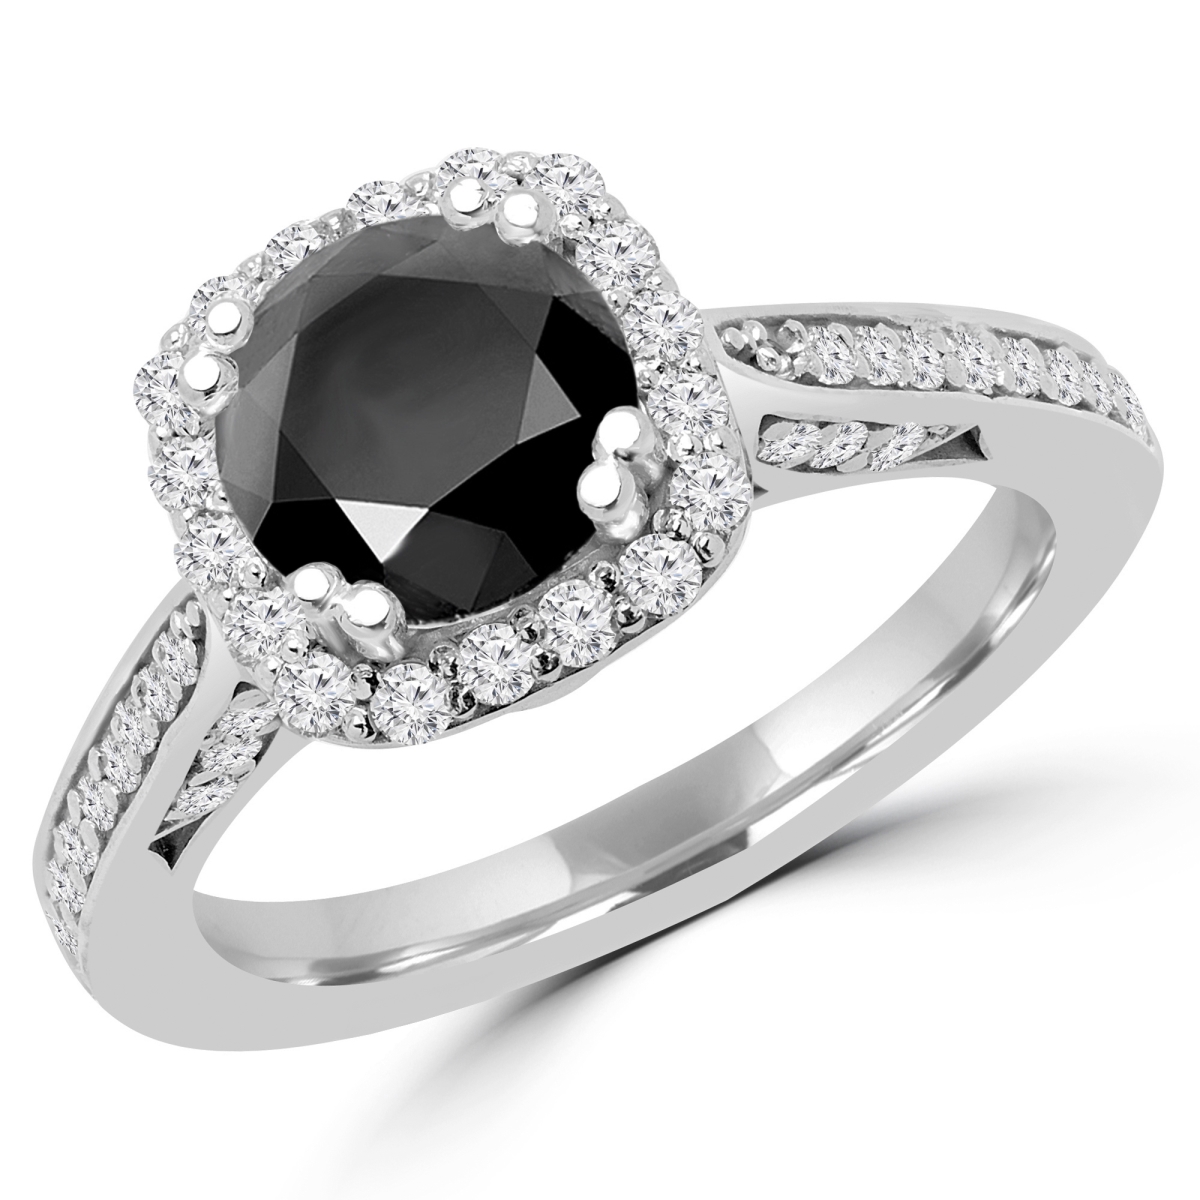 Picture of Majesty Diamonds MD170294-8.5 2.25 CTW Round Black Diamond Halo Engagement Ring in 18k White Gold - Size 8.5